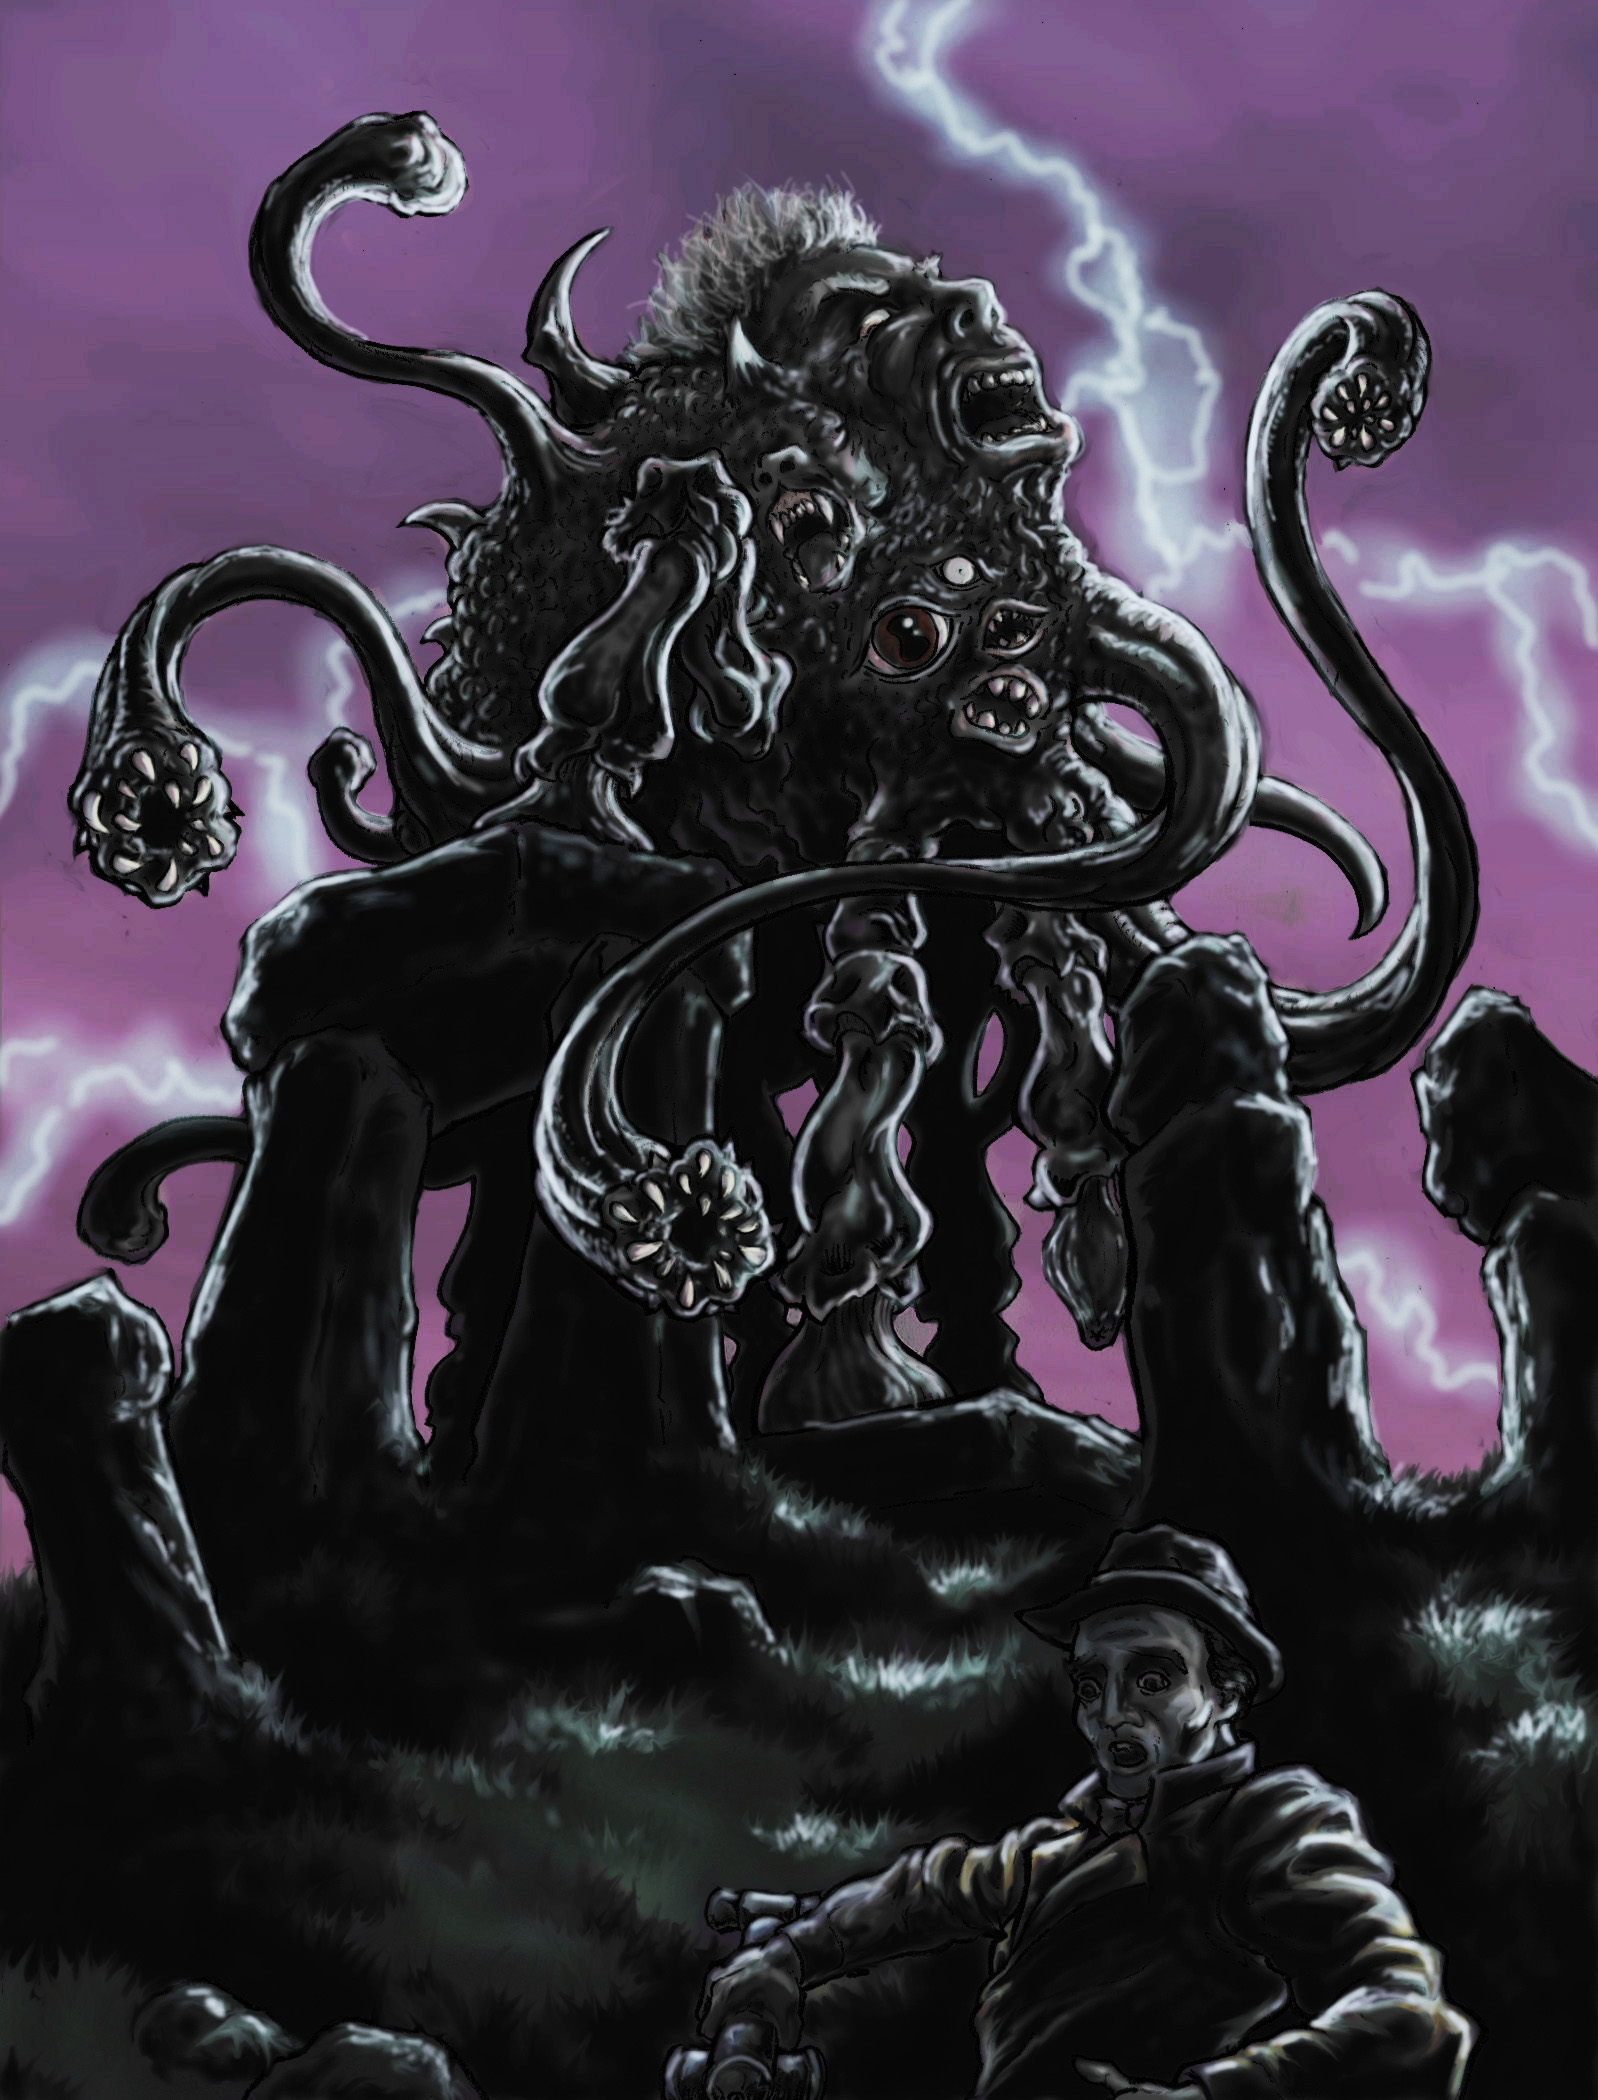 the dunwich horror story